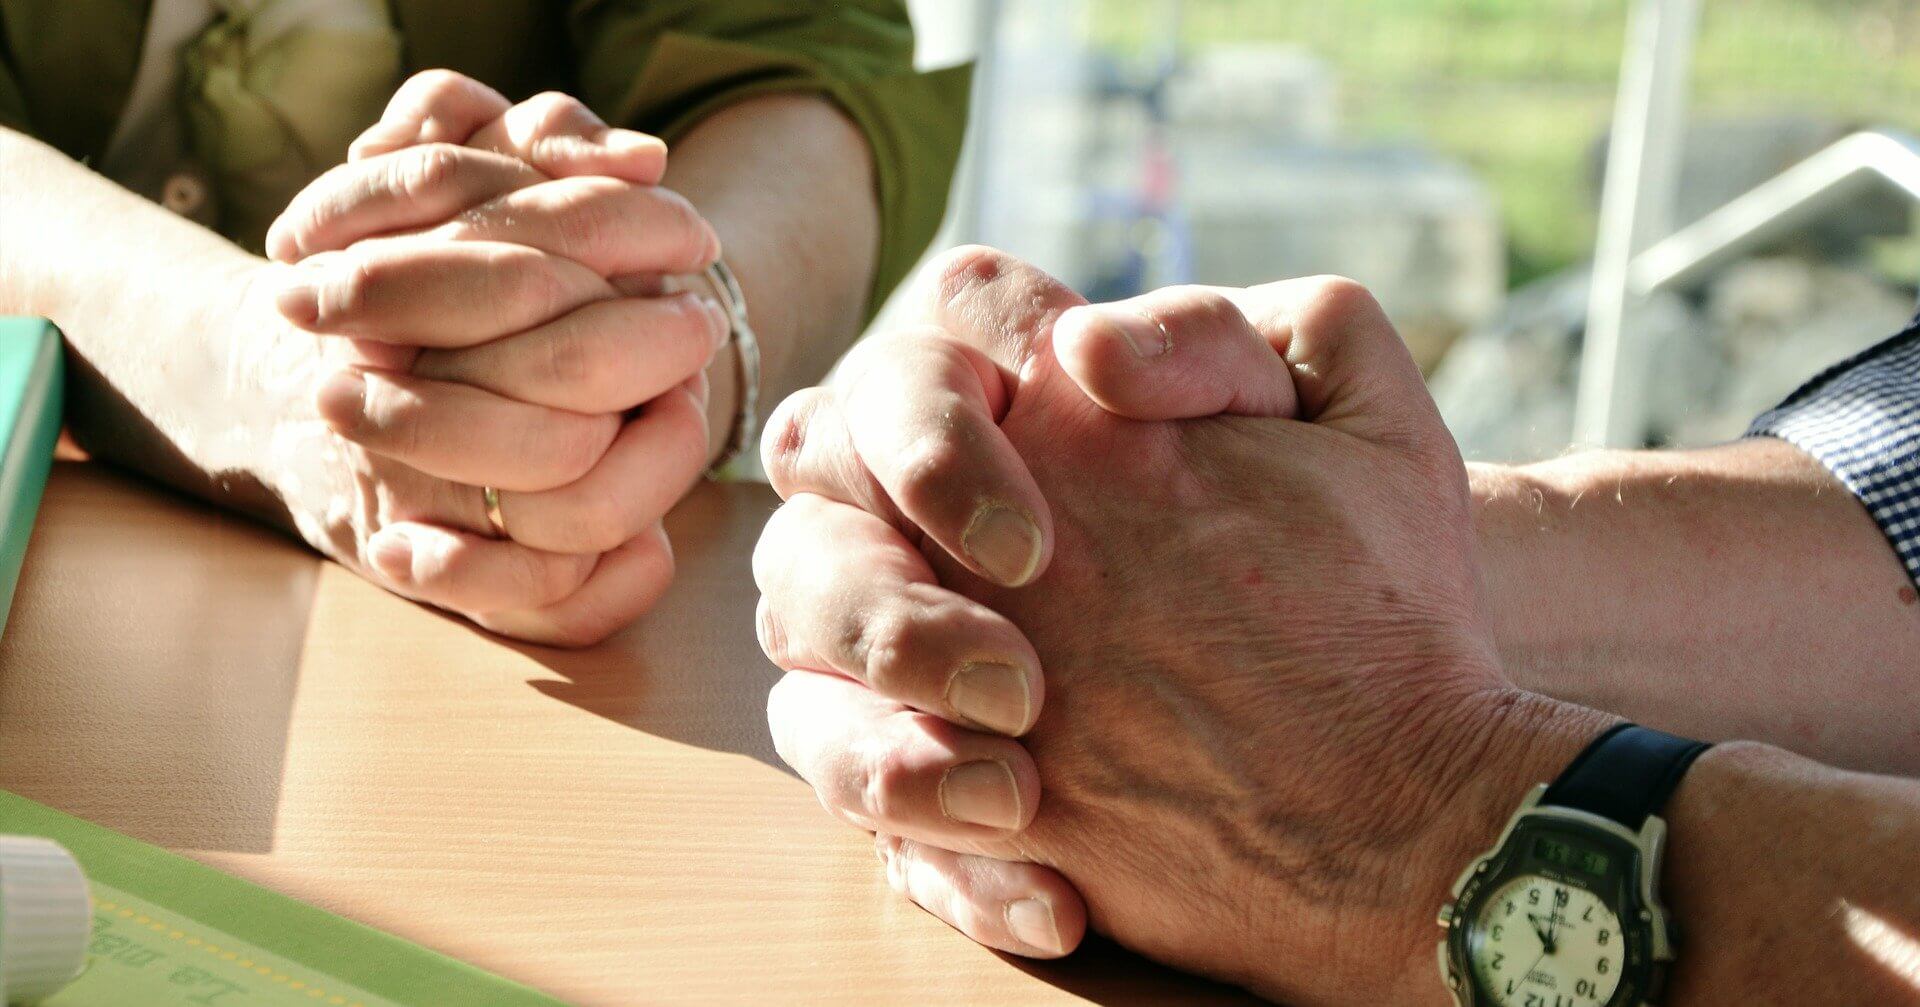 A close-up image of a couple’s praying hands